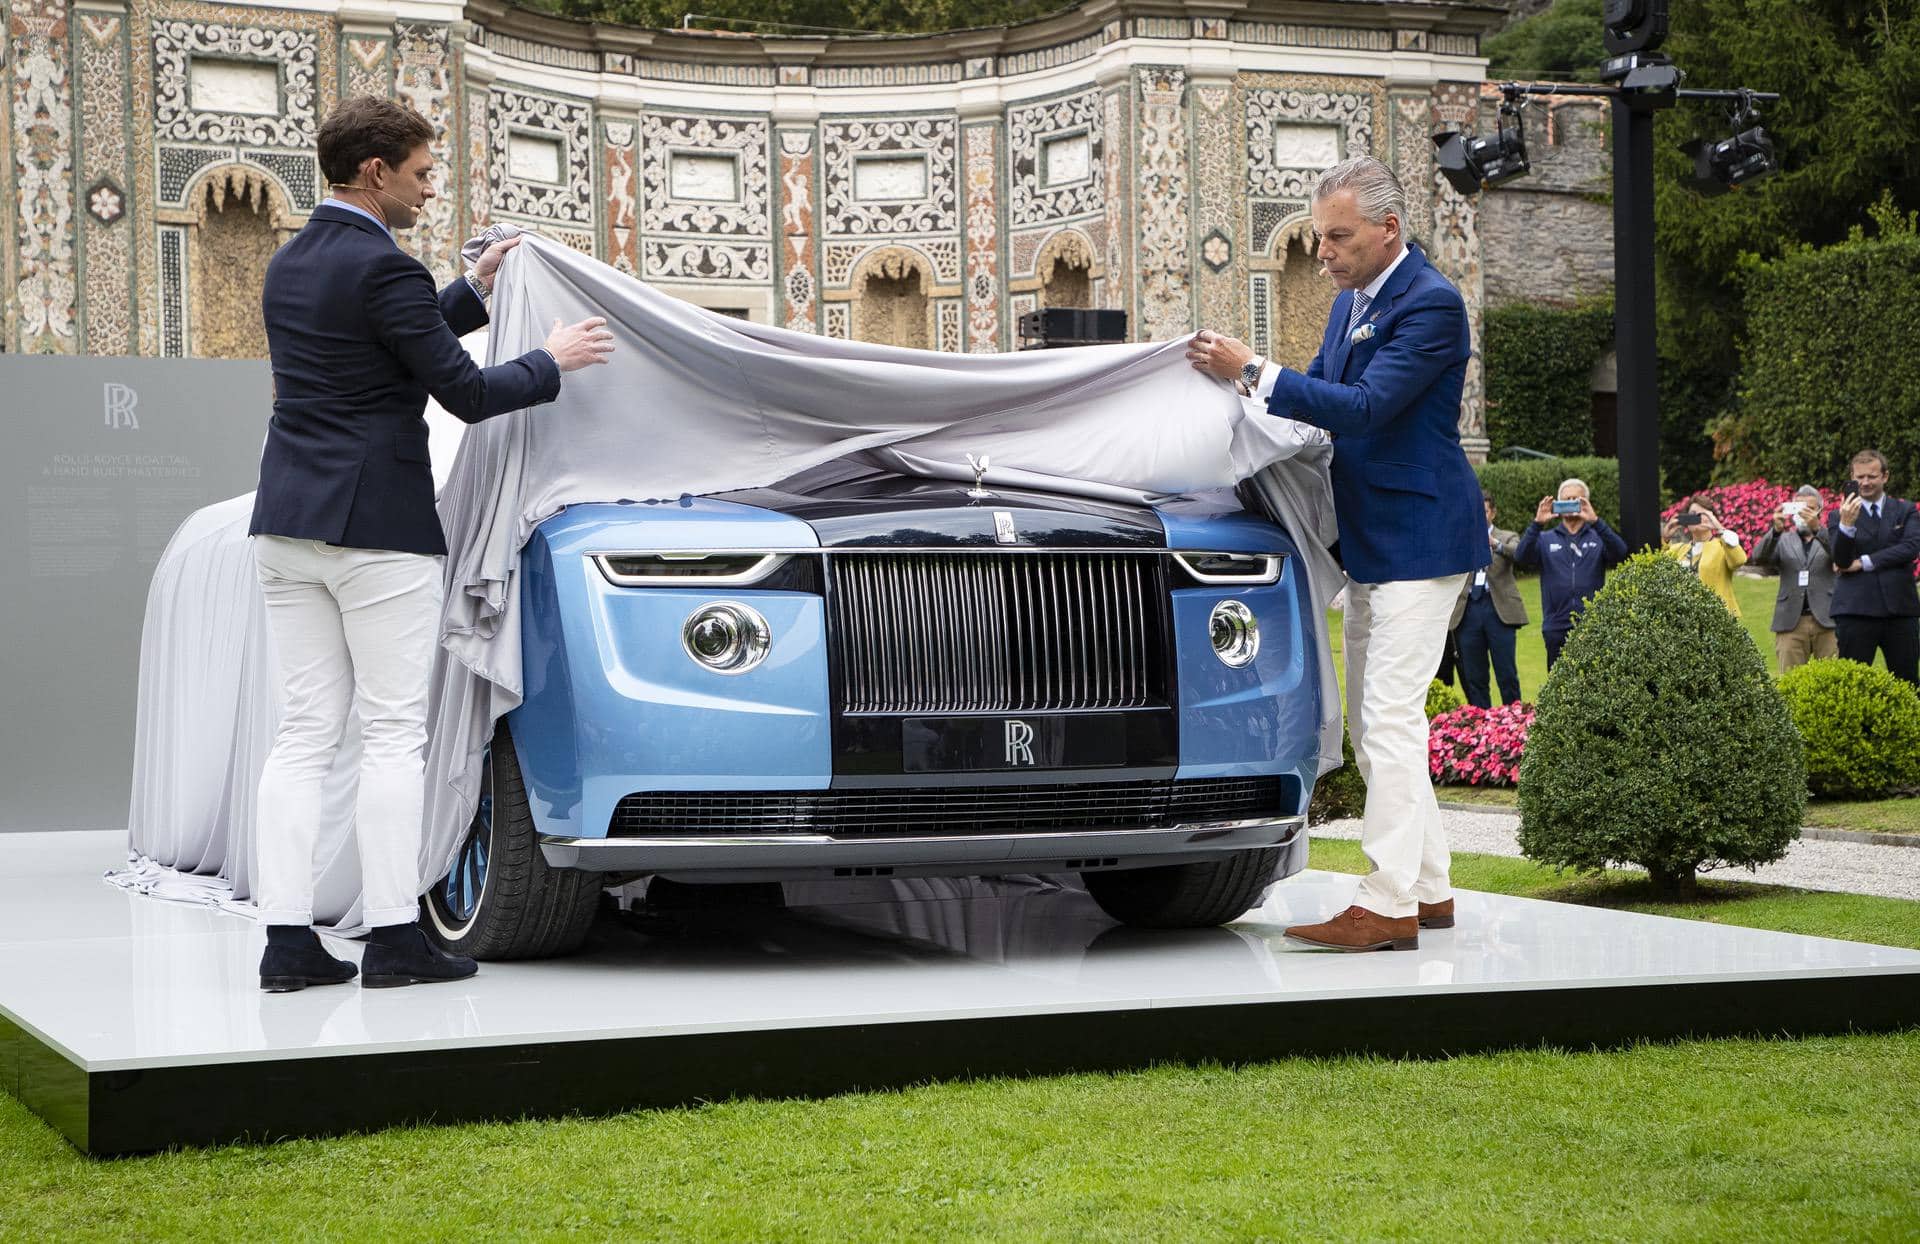 RollsRoyce builds the worlds most expensive new car